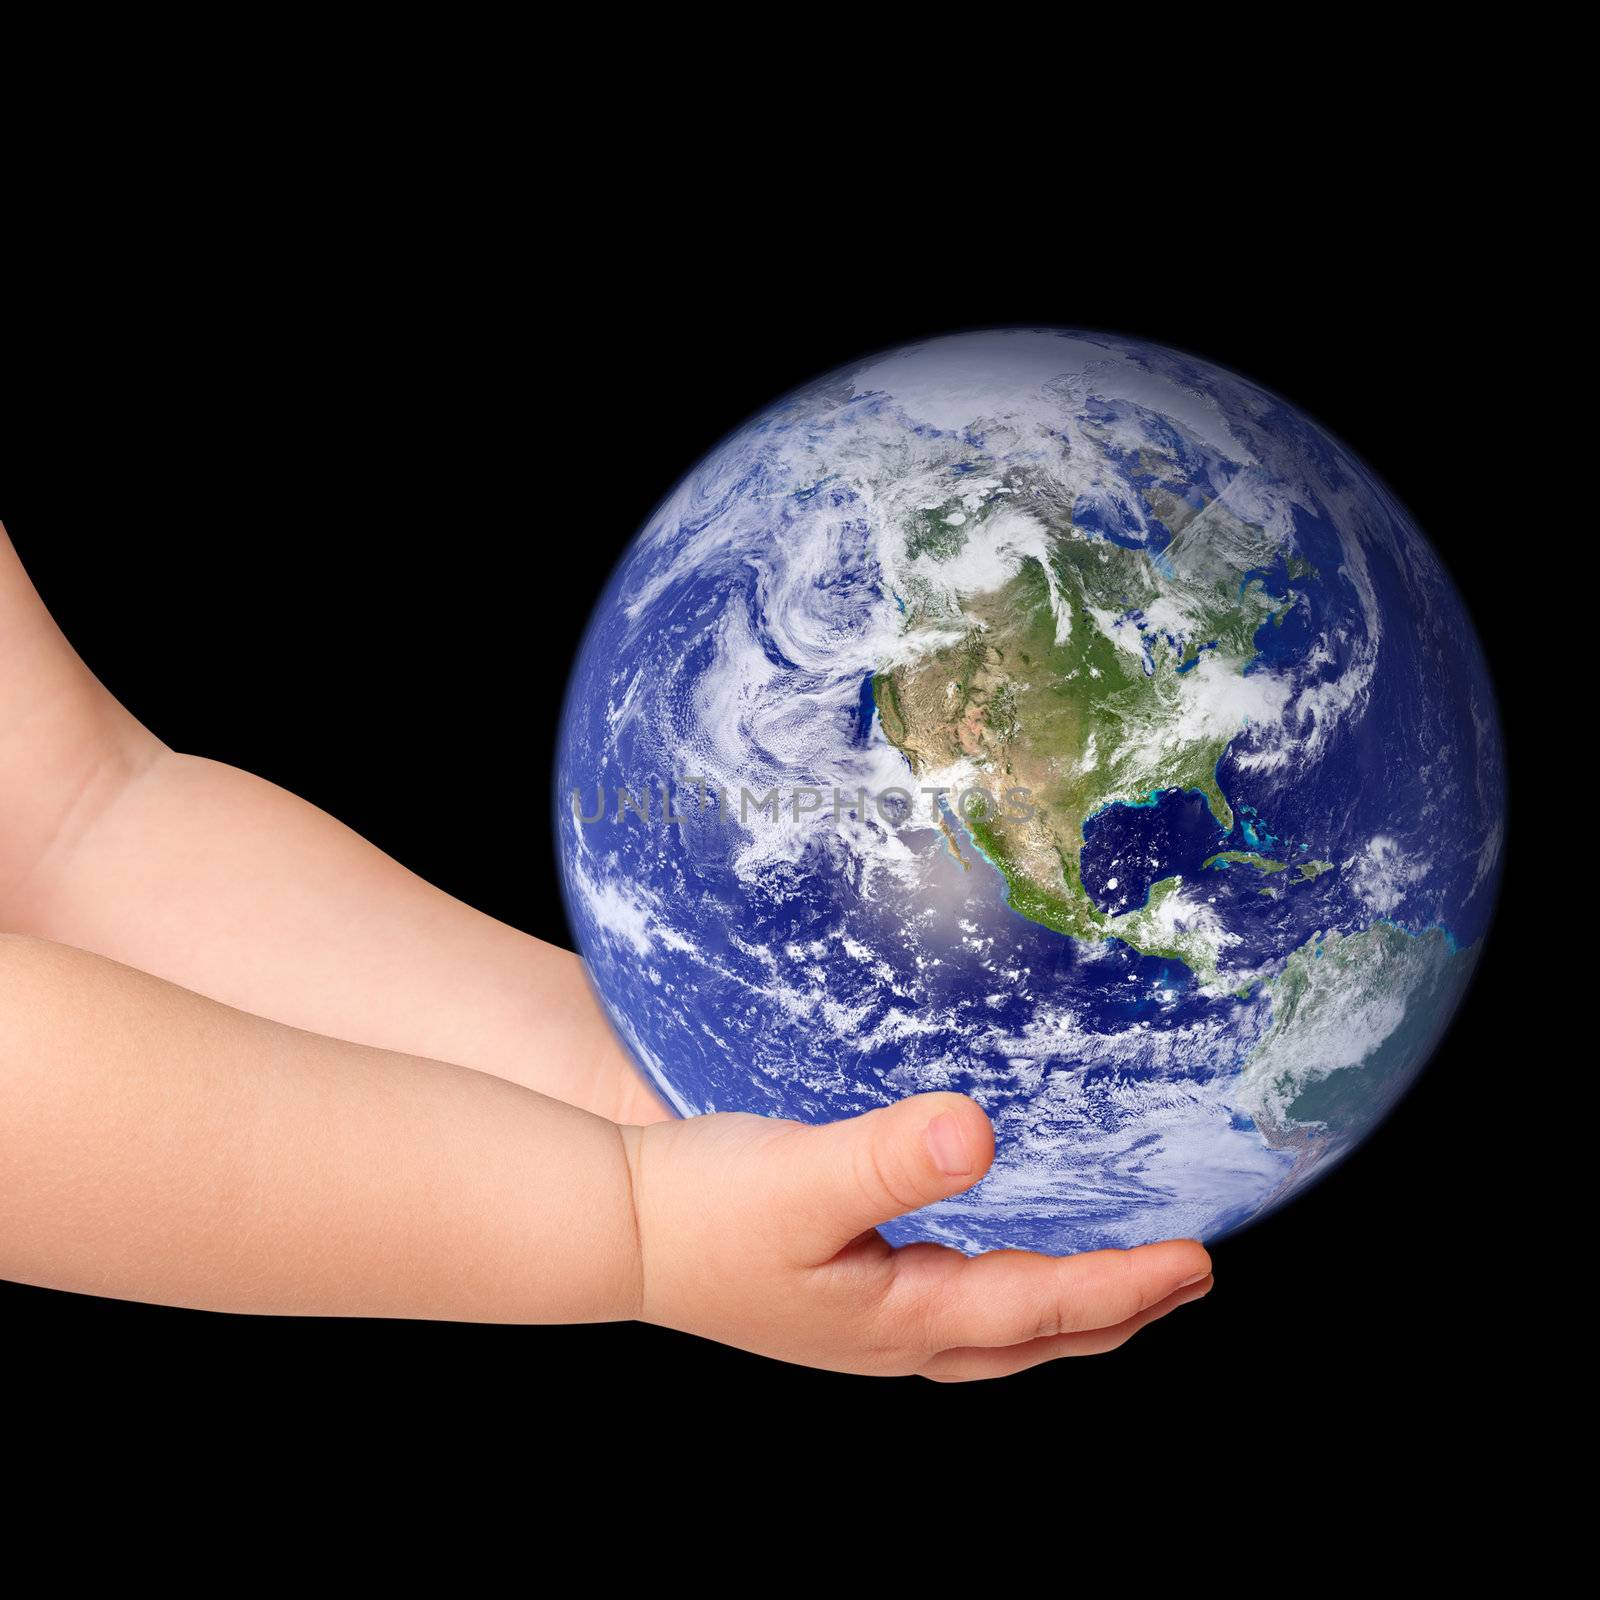 Little girl hold globe (Elements of this image furnished by NASA by rbv